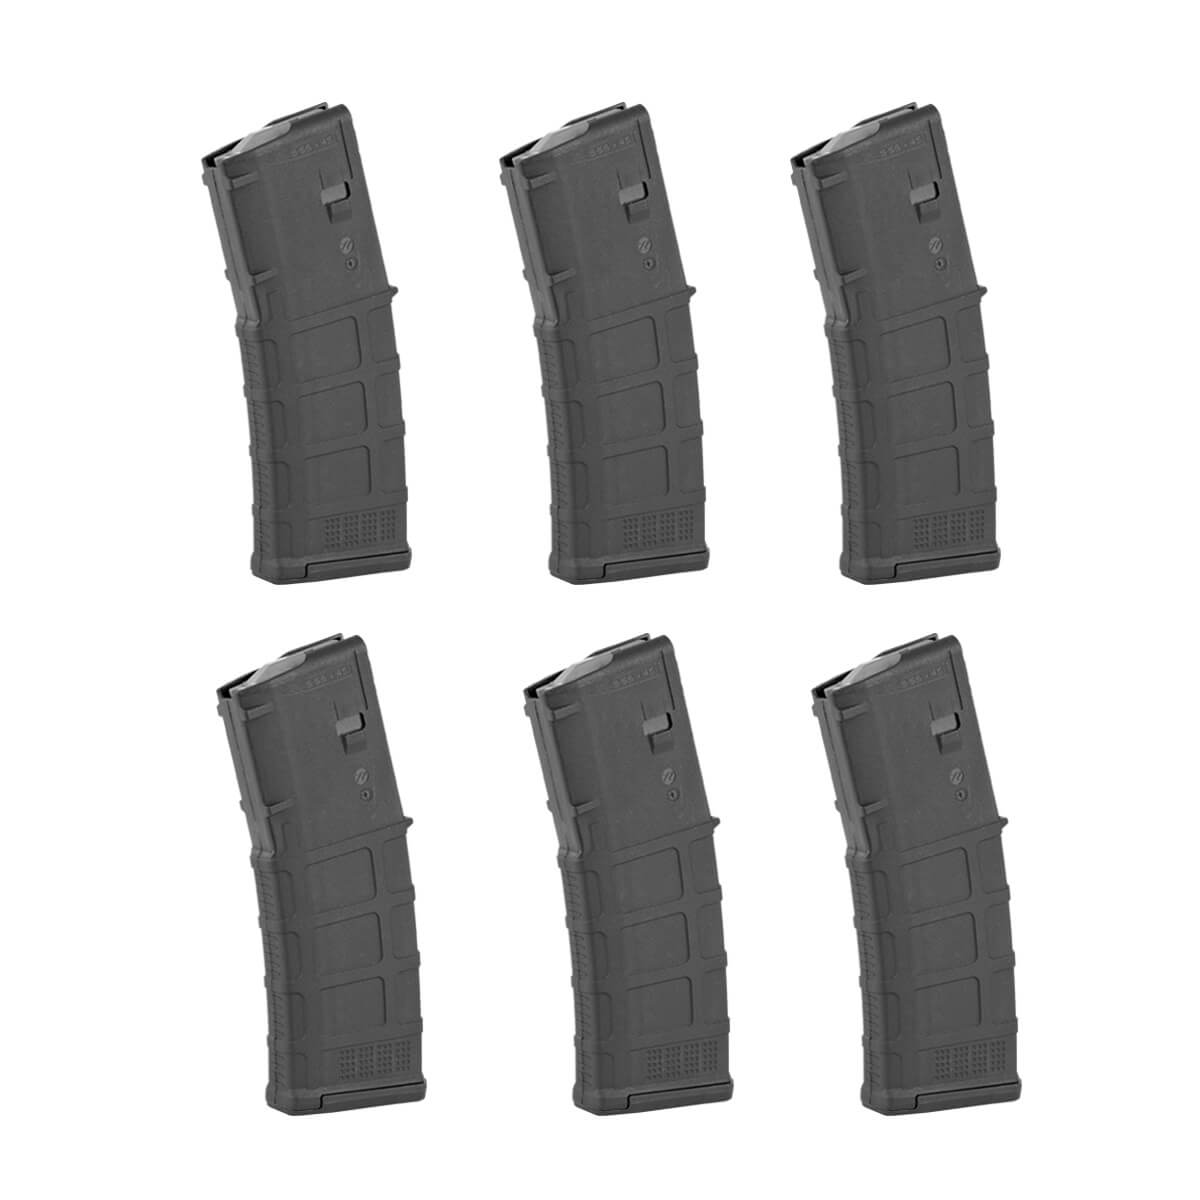 6-Pack - Magpul PMAG M3 30 Round - .223 / 5.56 NATO - MAG557 for AR 15